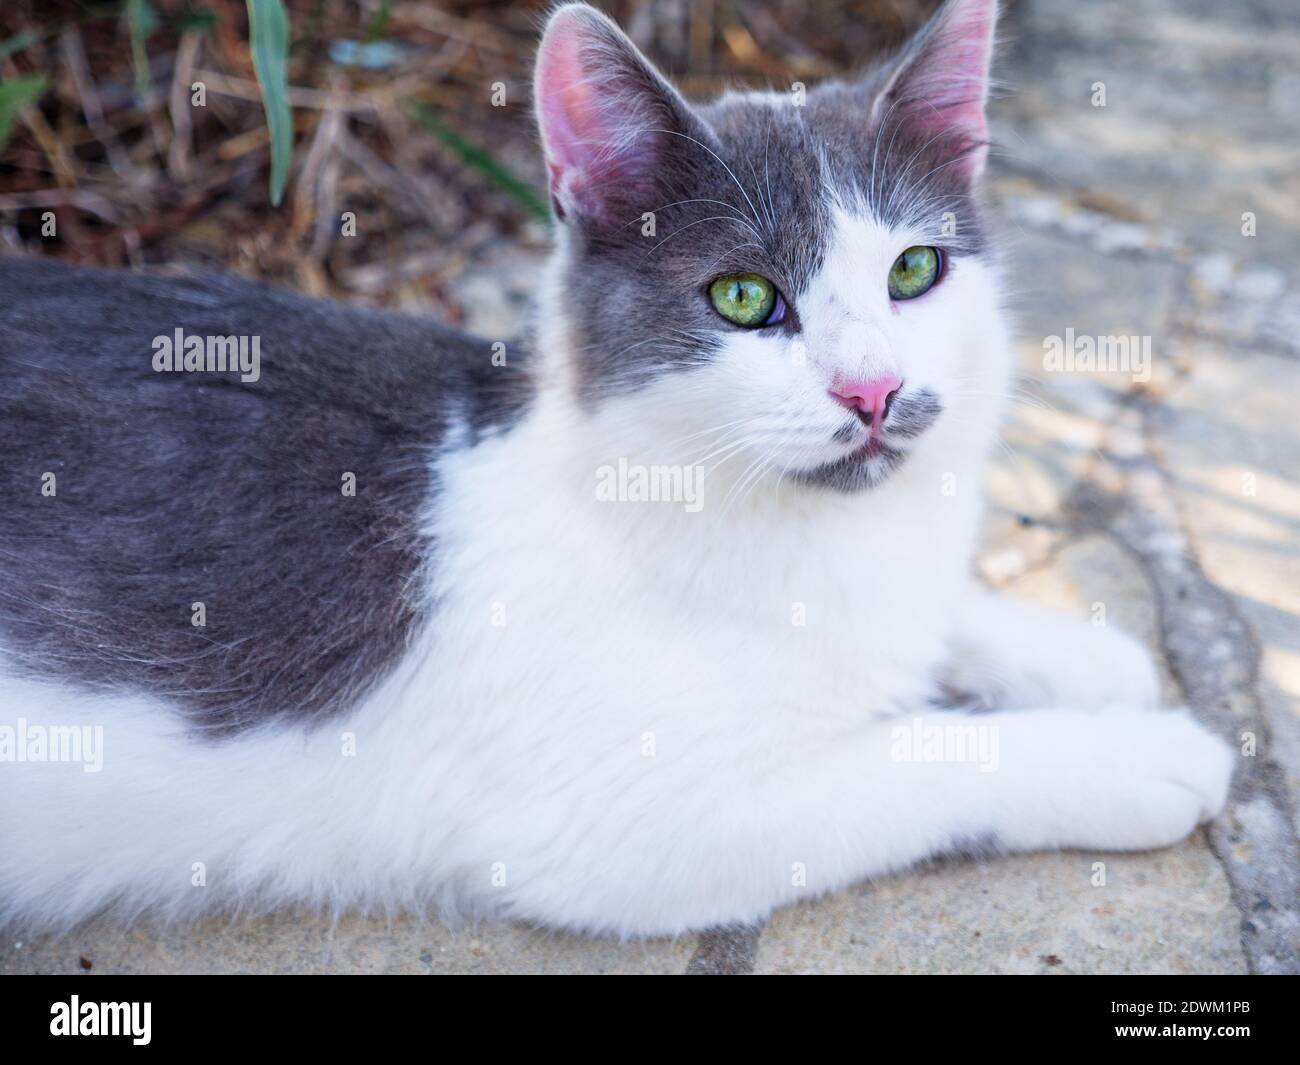 Beautiful non-pedigree tabby white and grey cat with bright green eyes and pink ears and nose having rest outdoors. Stock Photo